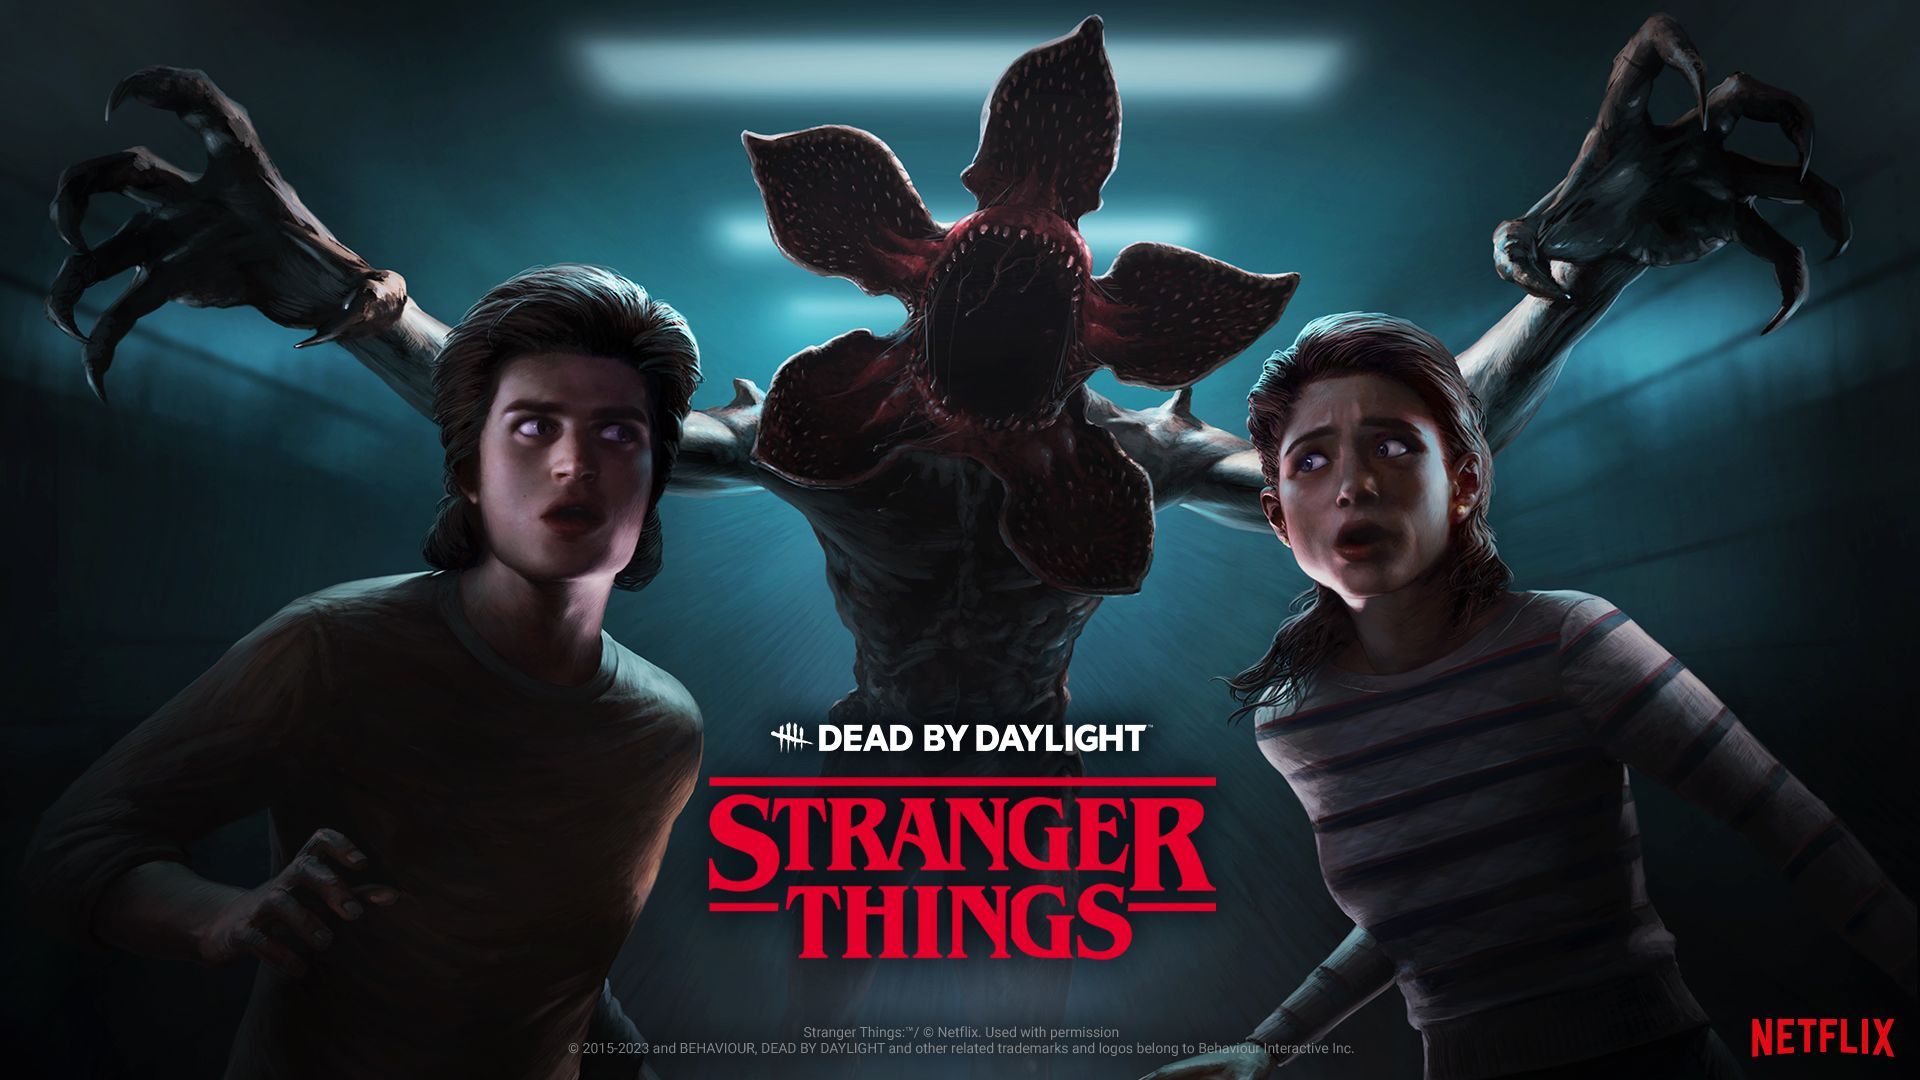 Dead by Daylight' Will Remove 'Stranger Things' DLC In November